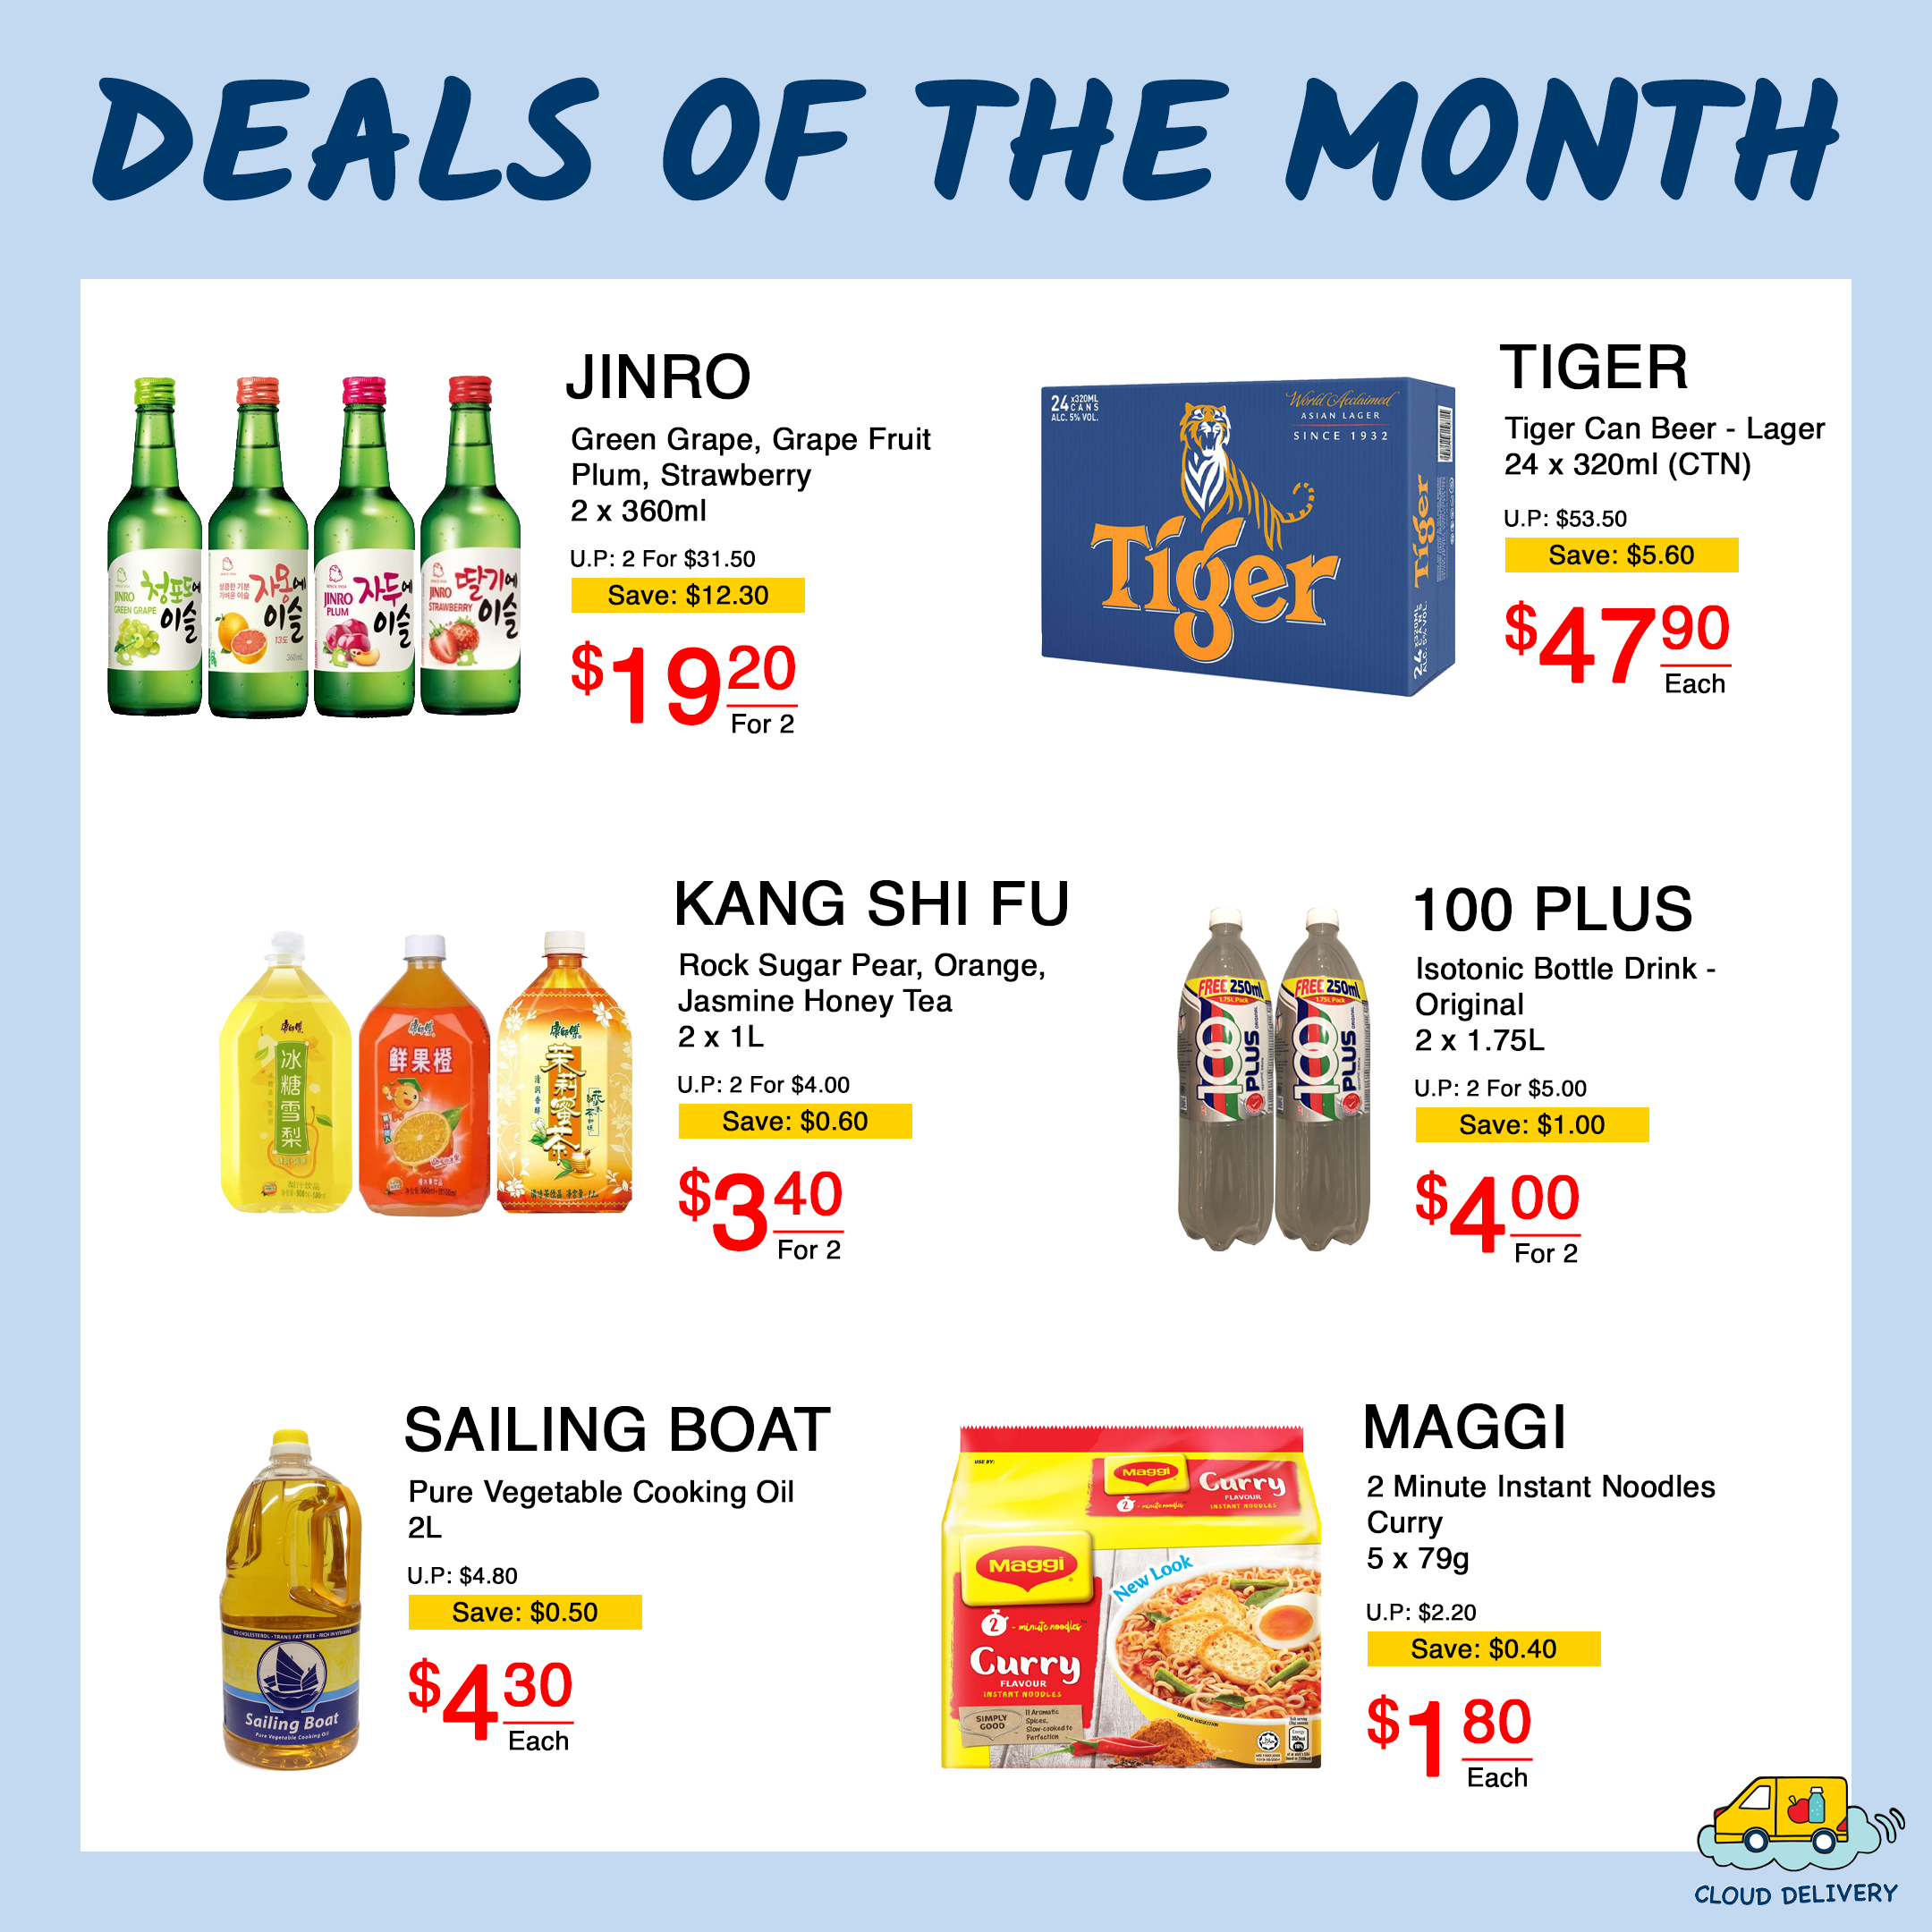 Deals of the Month - September